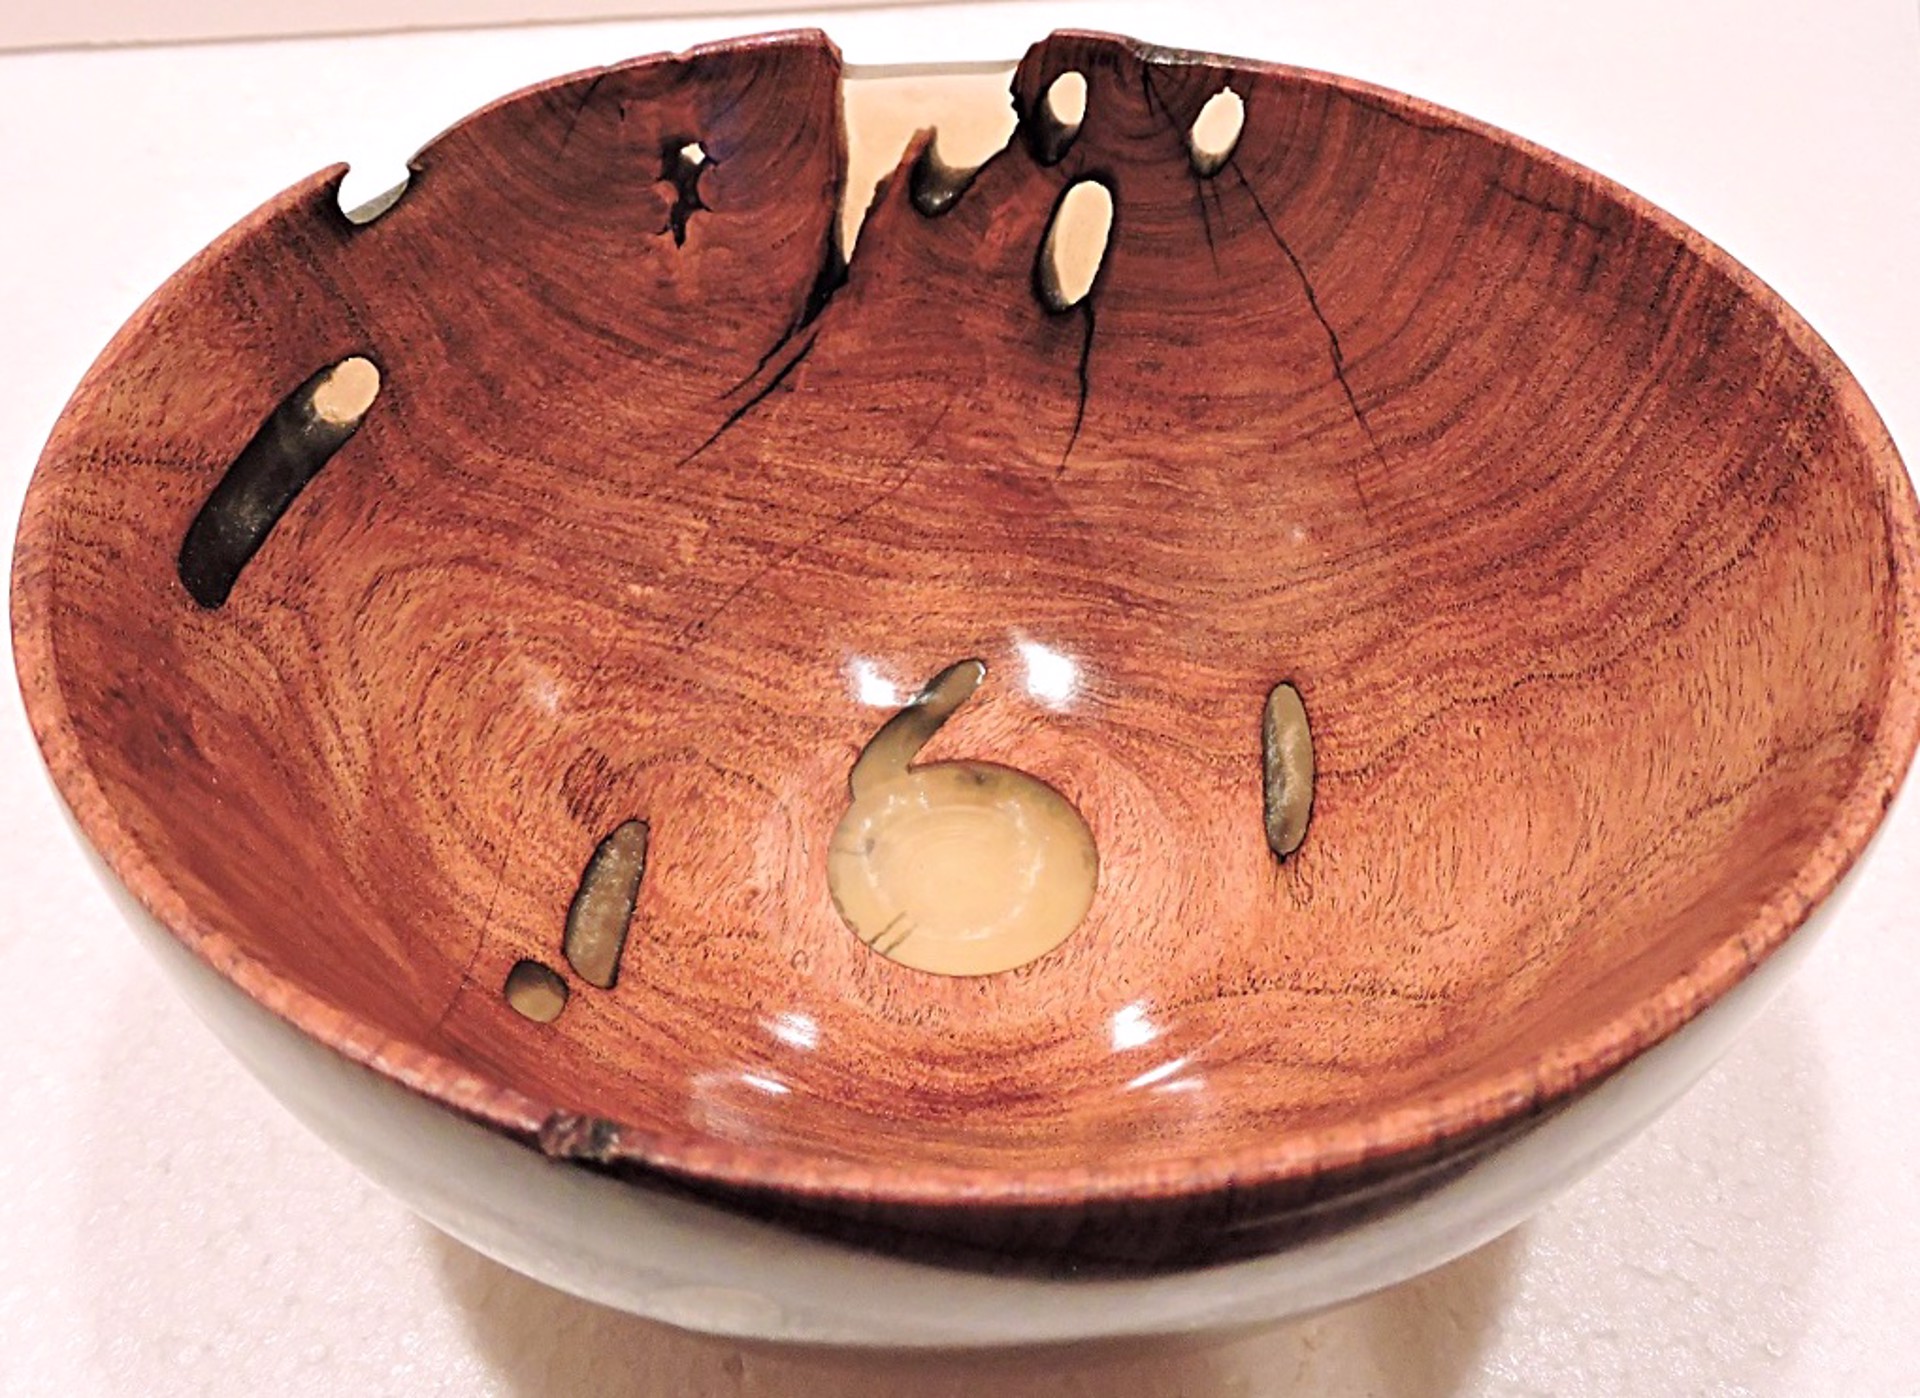 Bowl - Mesquite with Clear Resin by Jim Scott